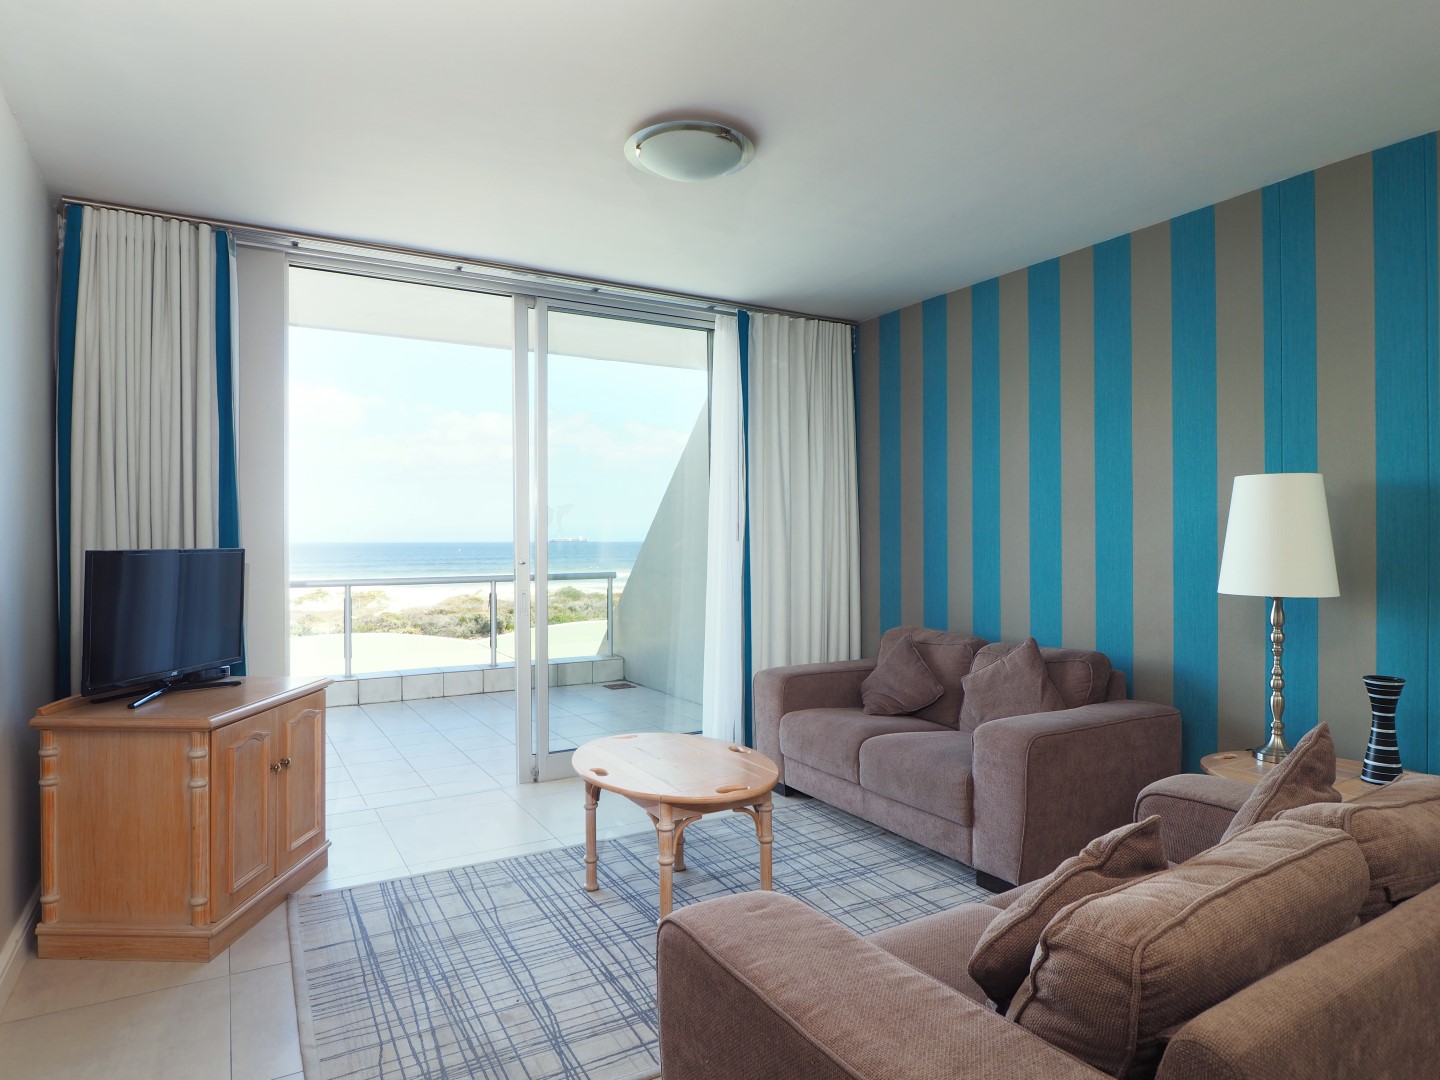 Photo 9 of Dolphin Beach Beauty accommodation in Bloubergstrand, Cape Town with 3 bedrooms and 2 bathrooms